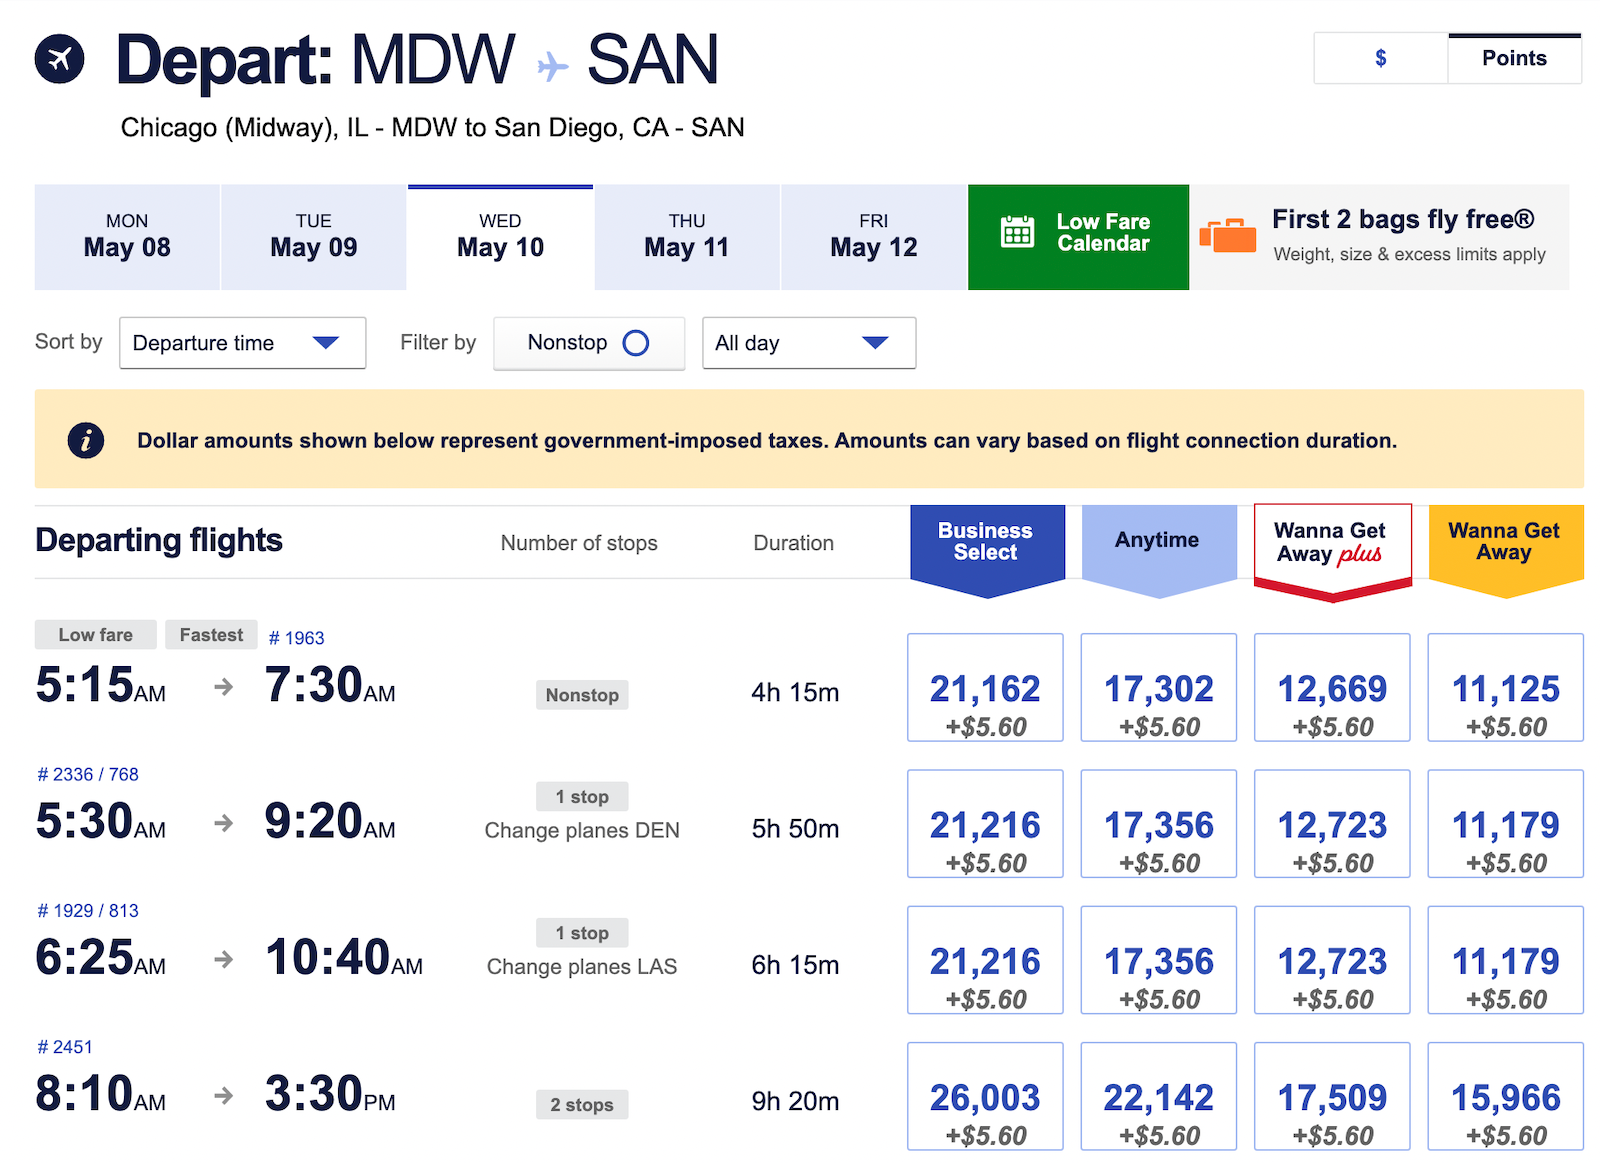 award pricing for Southwest flights from Chicago-Midway to San Diego